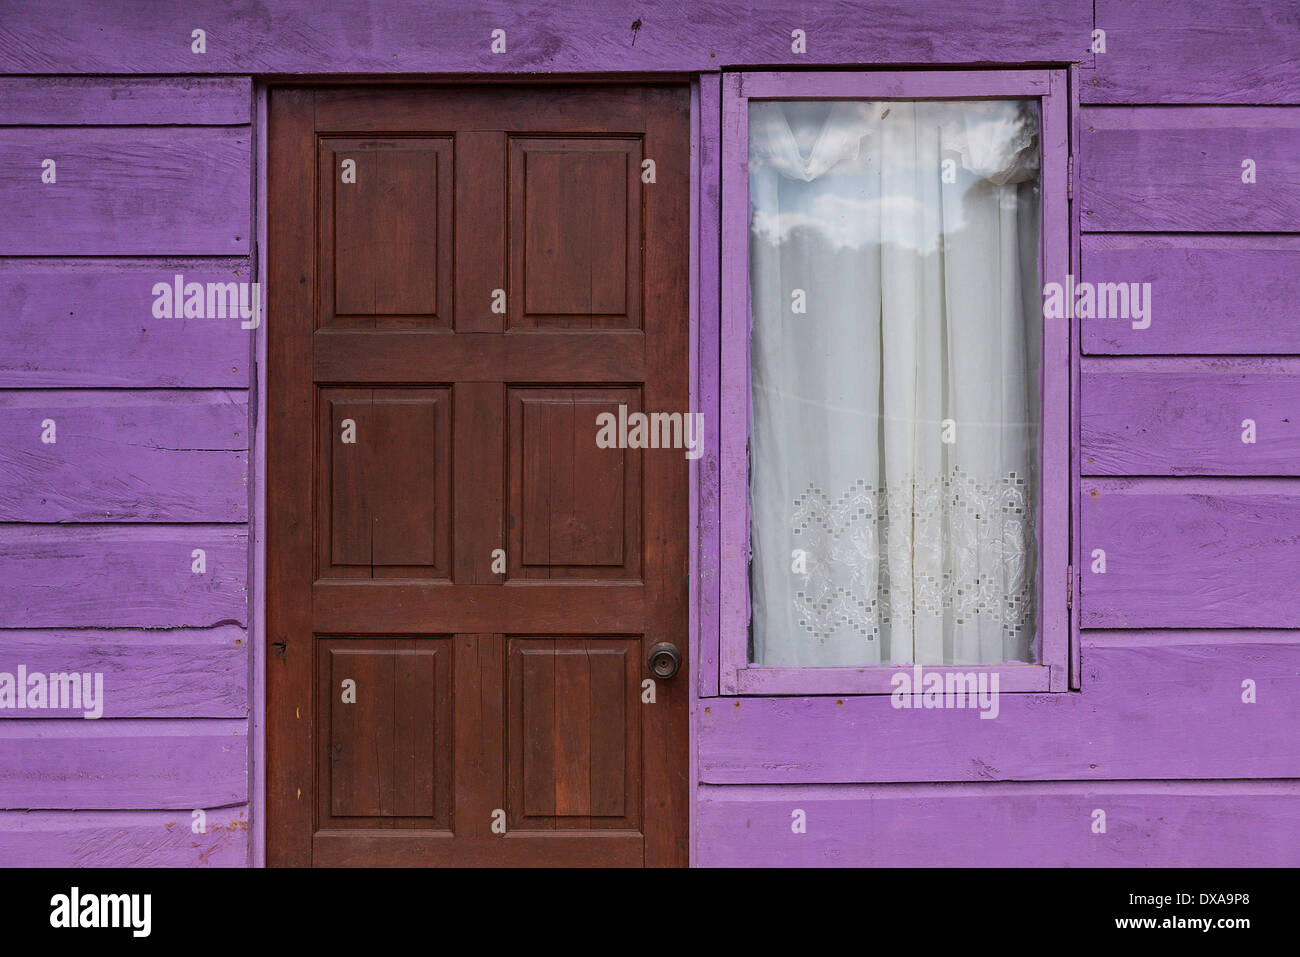 Colorful purple facade of a typical Jamaican house, Jamaica. Stock Photo